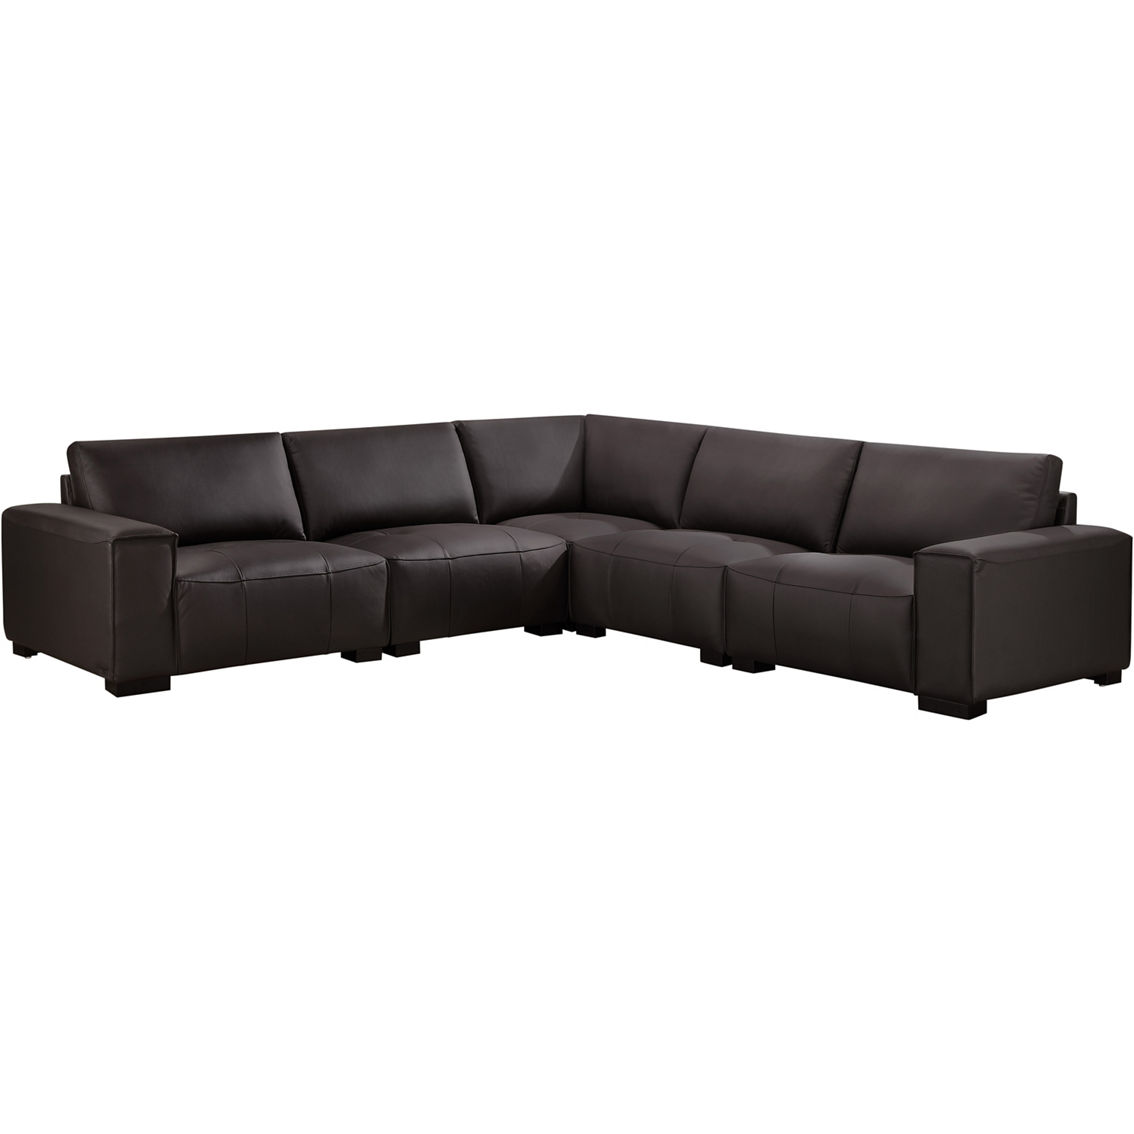 Abbyson Teagan Leather Modular Sectional 6 pc. - Image 4 of 9